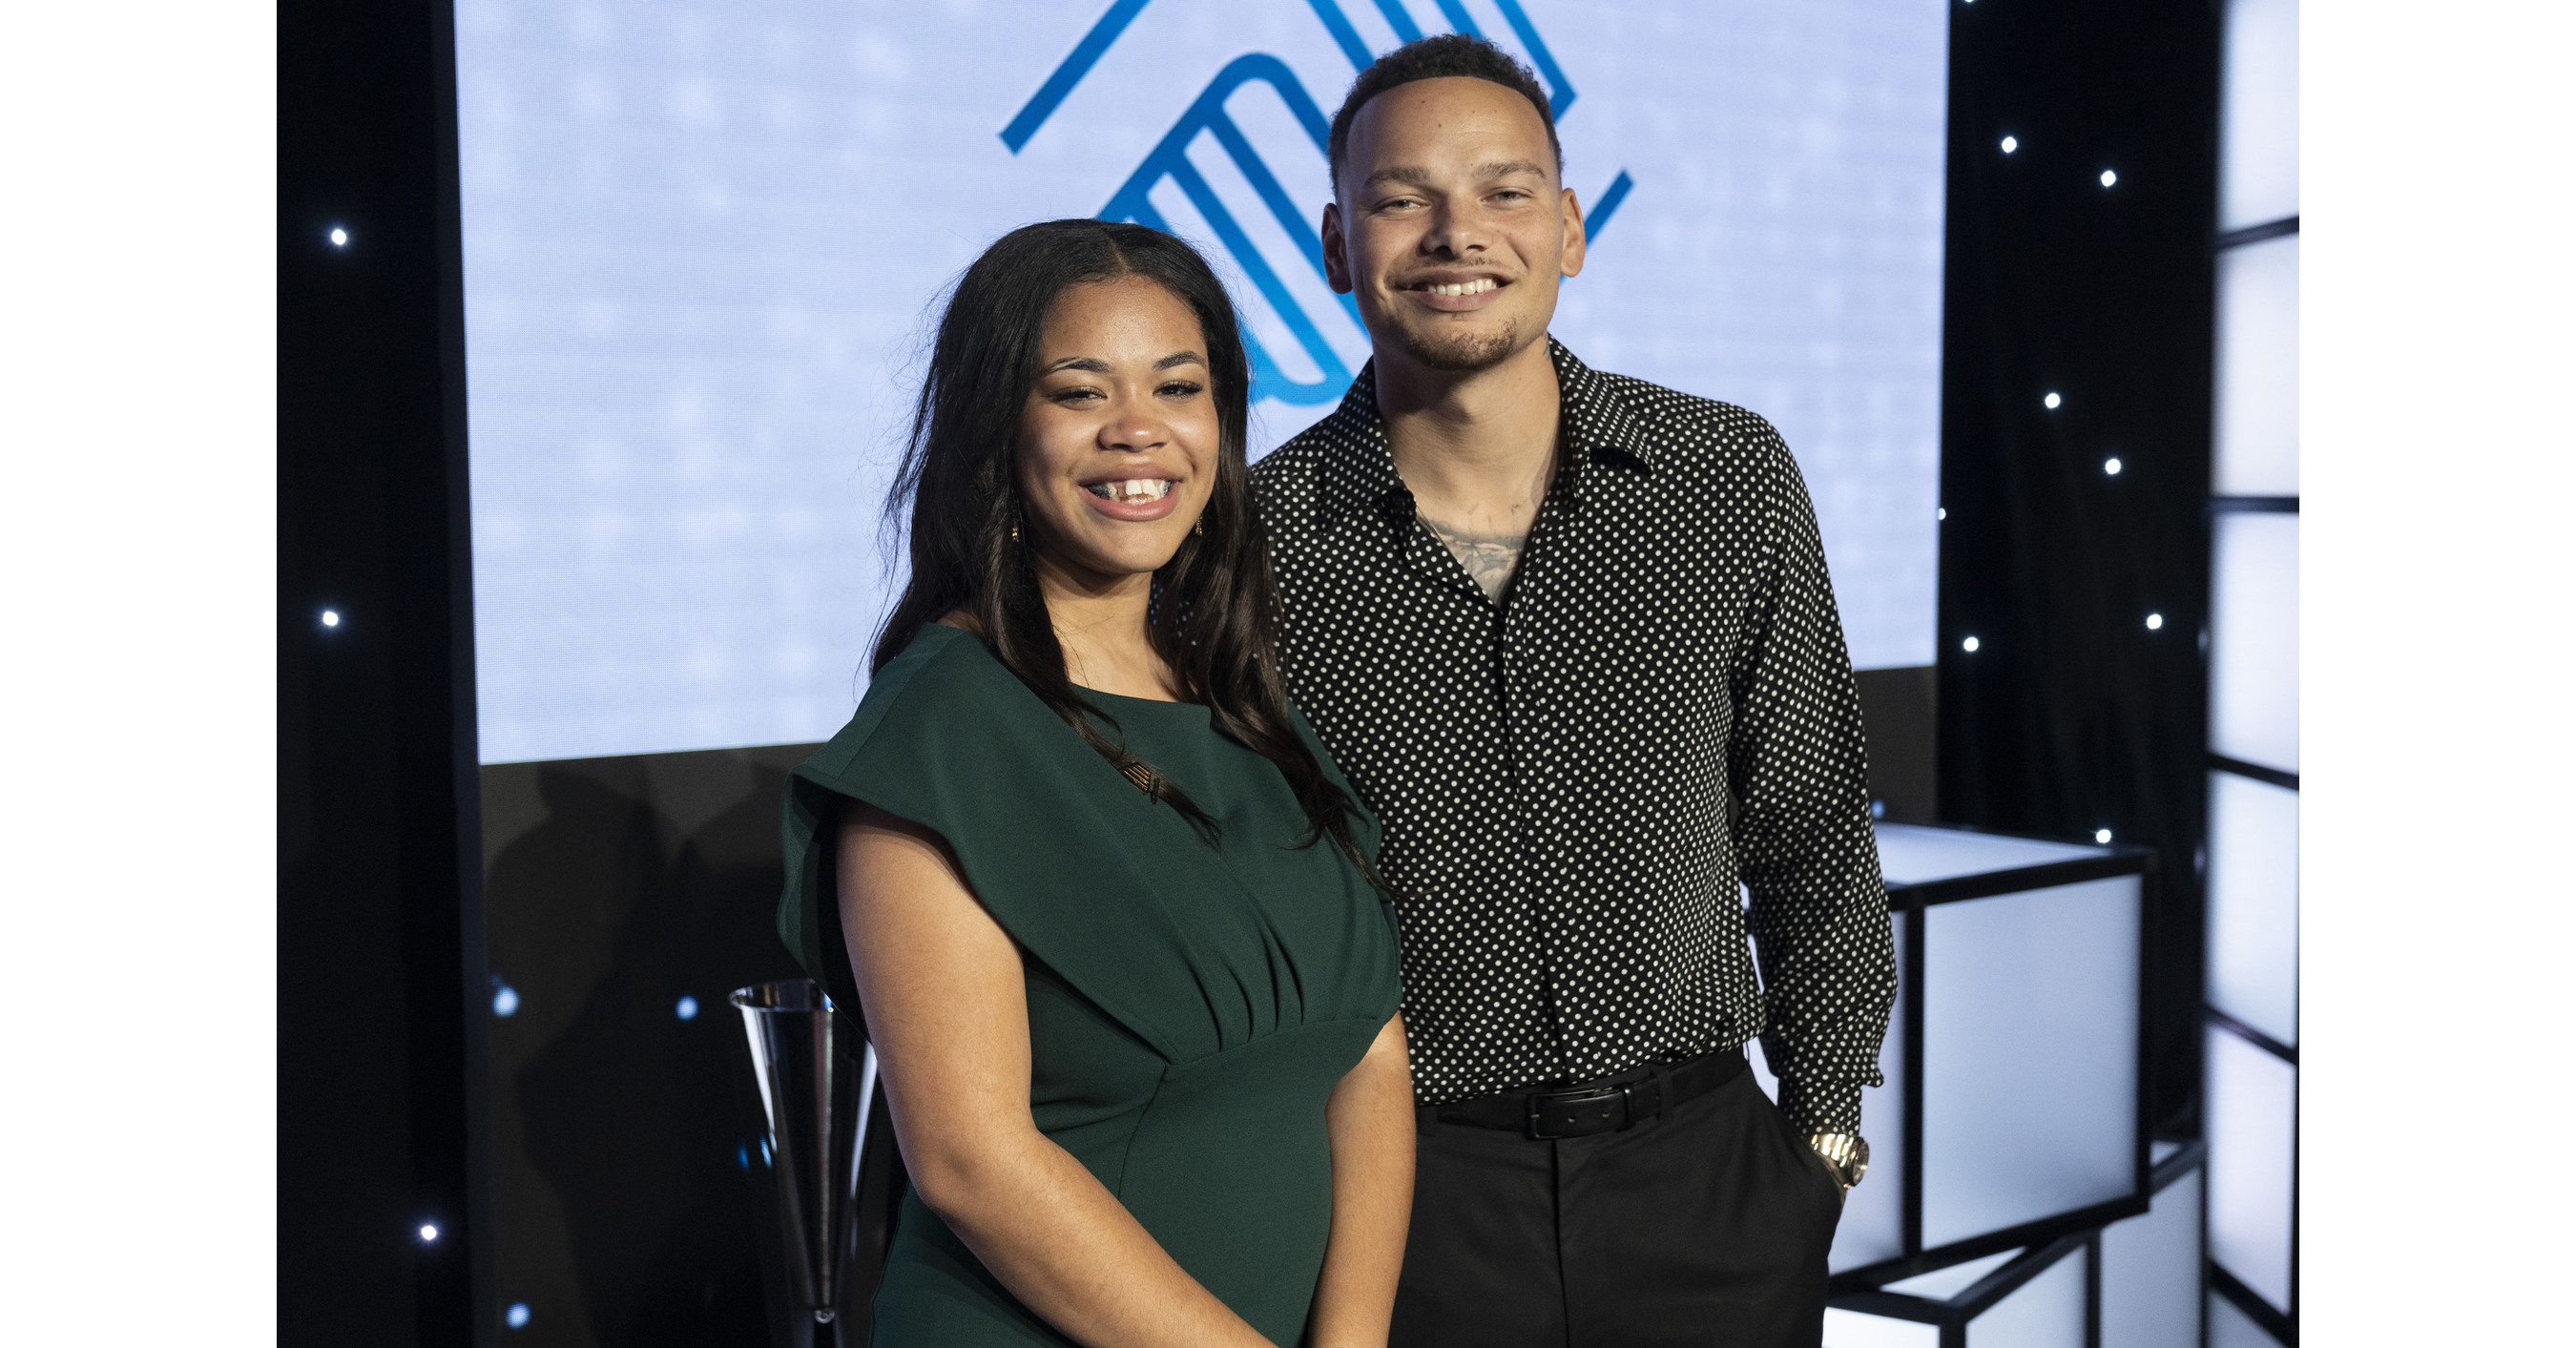 Boys & Girls Clubs of America Awards D.C. Teen with $50000 Scholarship, a Toyota Corolla, and a $5000 Kohl's Gift Card, During Star-Studded Annual "National Youth of the Year" Celebration